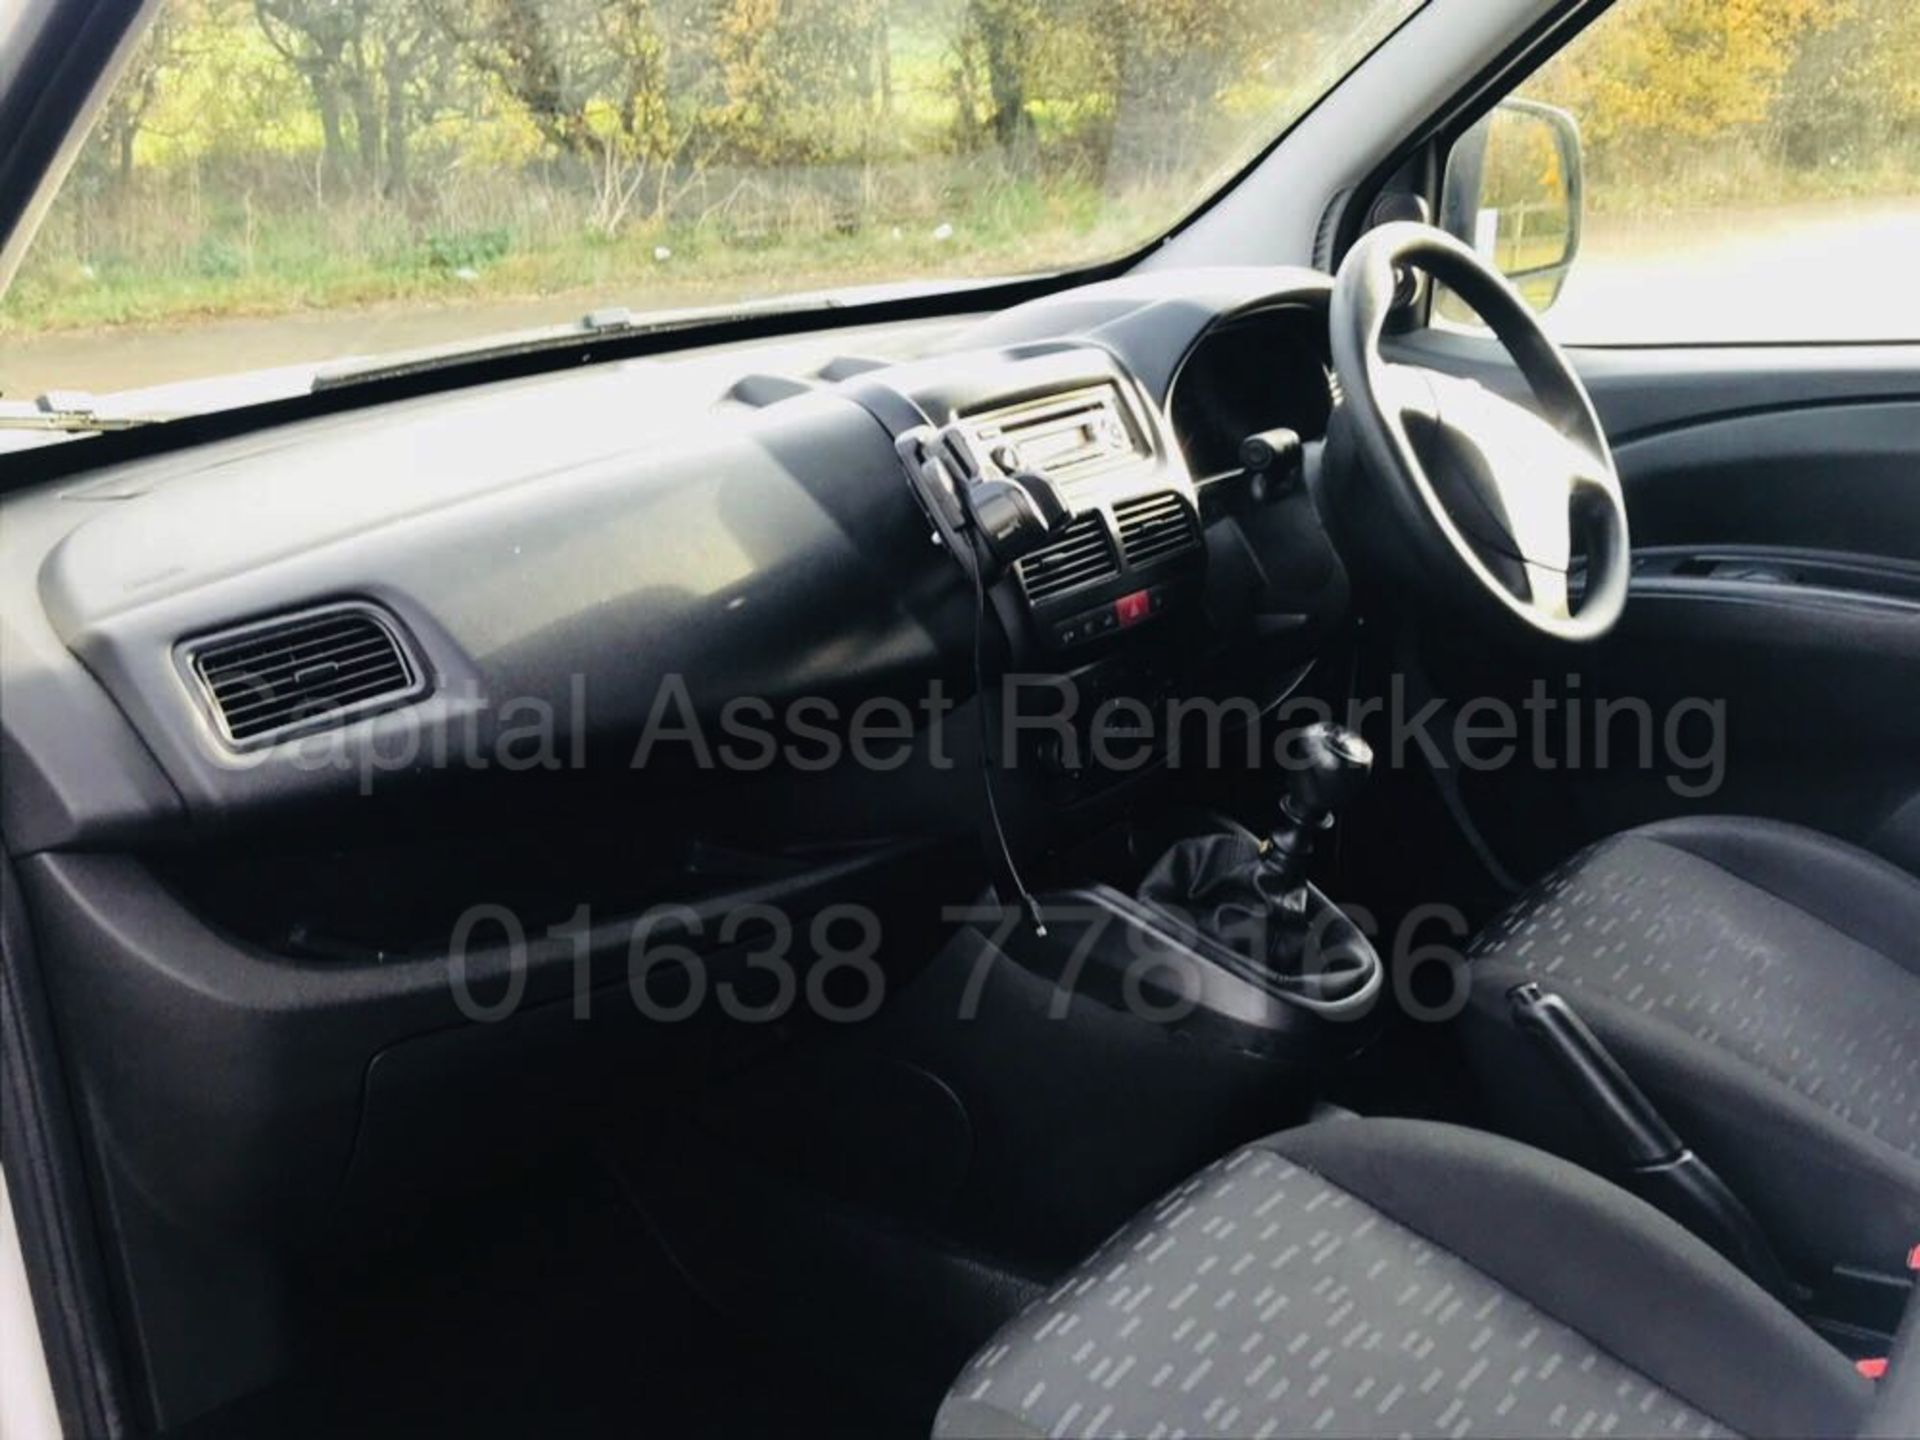 VAUXHALL COMBO 2000 L1H1 (2012 - NEW MODEL) '1.6 CDTI - 105 BHP - STOP / START' (1 OWNER FROM NEW) - Image 9 of 15